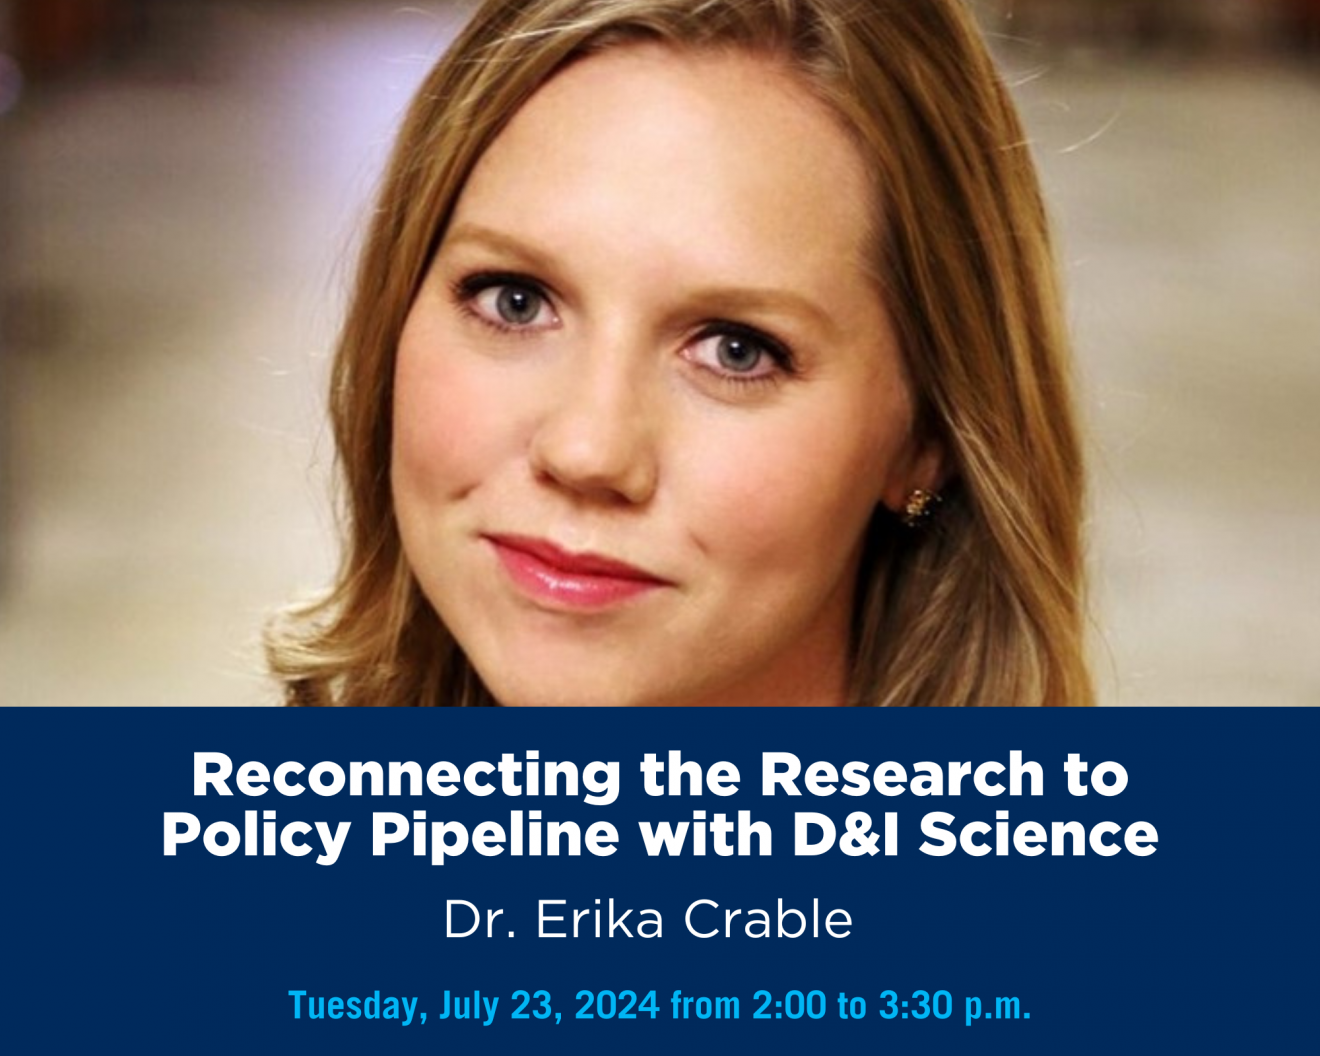 A person smiling with text that says 'Reconnecting the Research to Policy Pipeline with D&I Science Dr. Erika Crable Tuesday, July 23, 2024 from 2:00 to 3:30 p.m.'